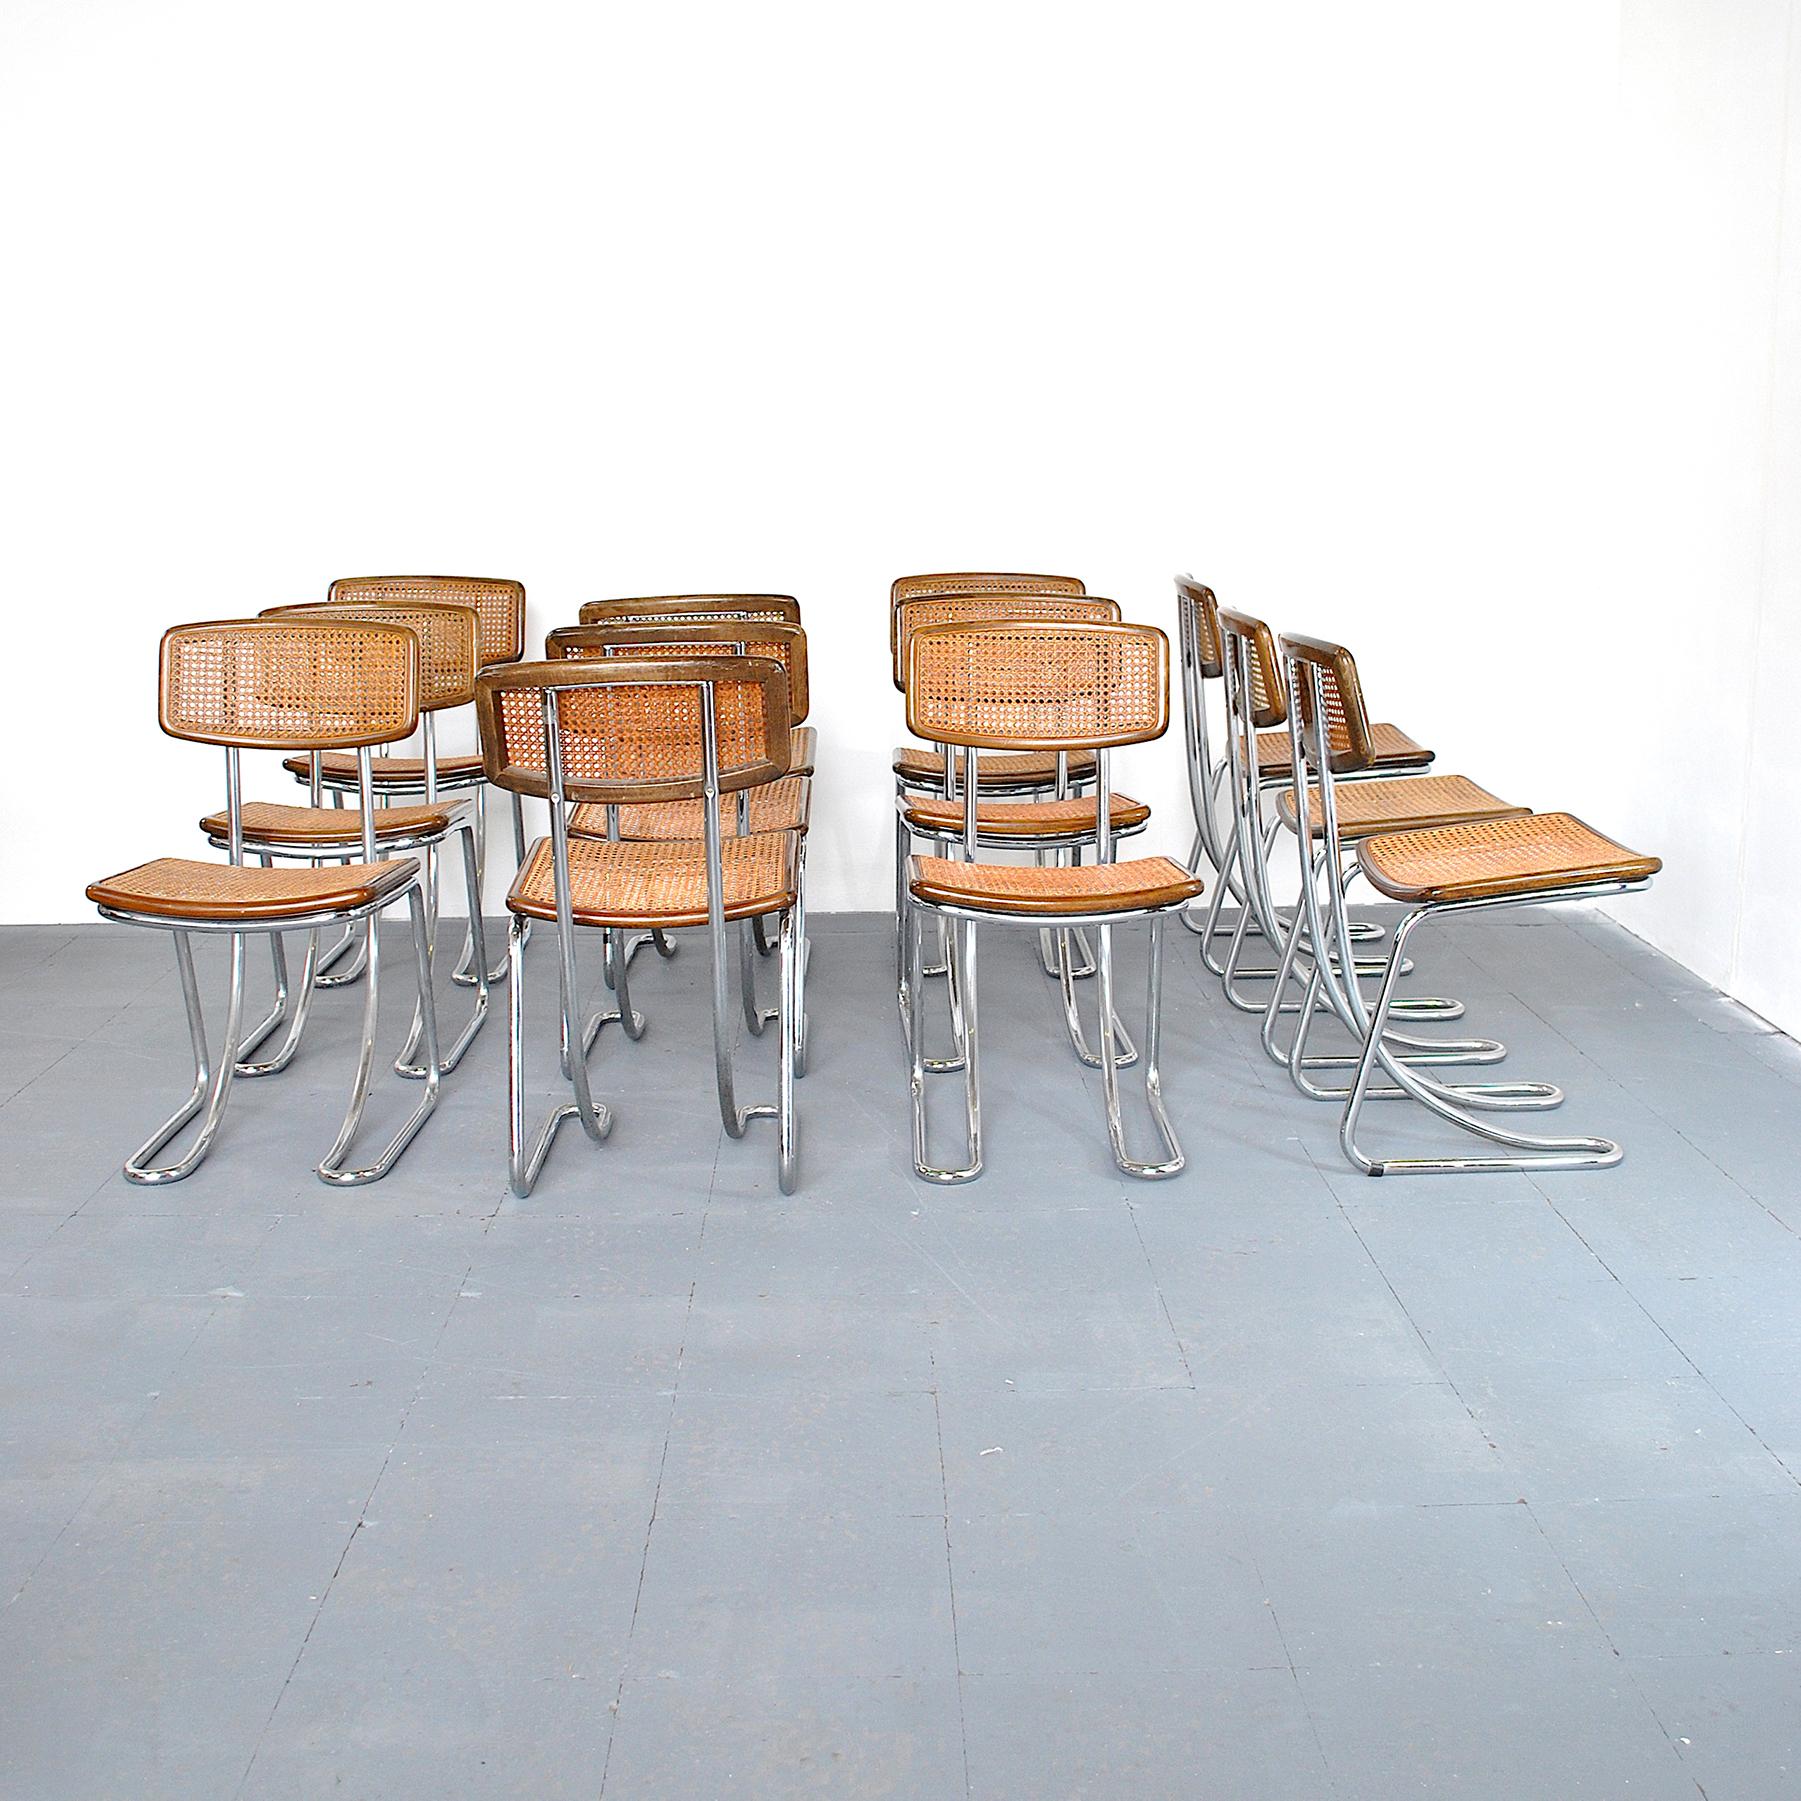 Set of 14 chairs in the style of Cesca by Marcel Breuer.